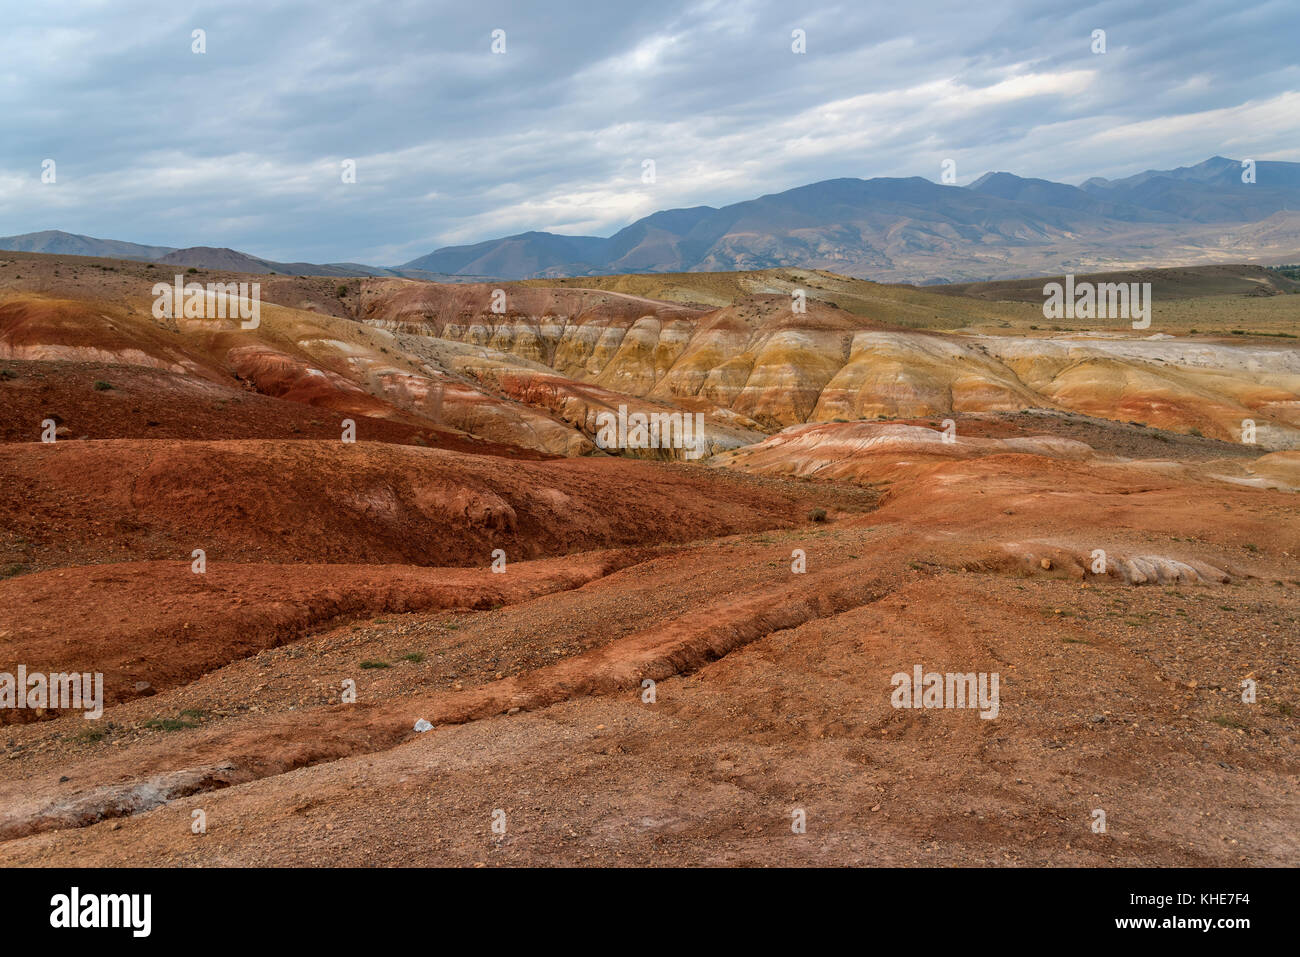 Picturesque steppe desert landscape with multicolored mountains, cracks in the ground and sparse vegetation on the background of cloudy sky Stock Photo